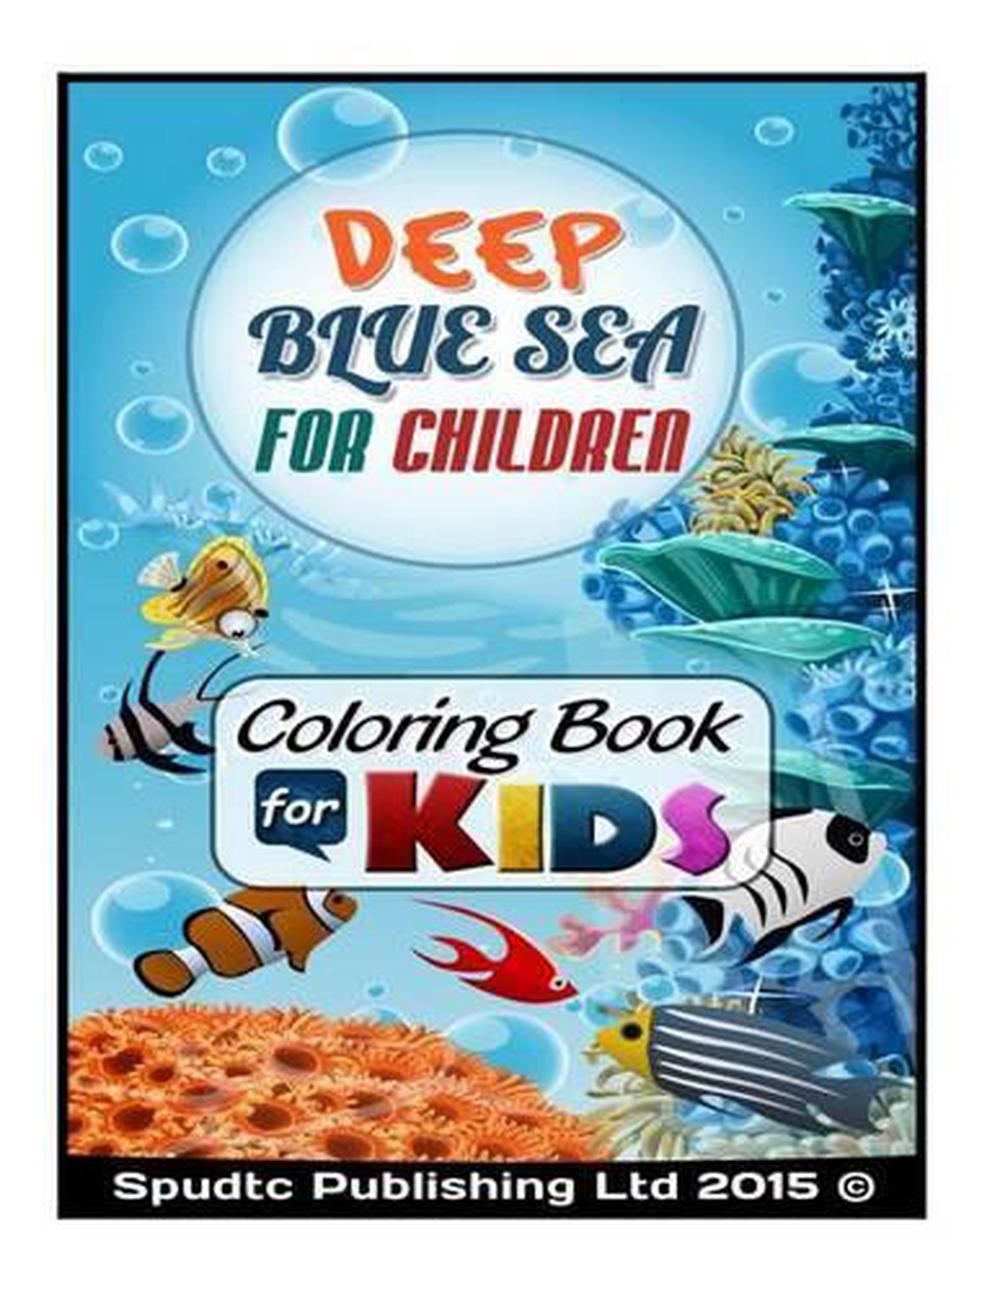 Deep Blue Sea for Children Coloring Book for Kids by